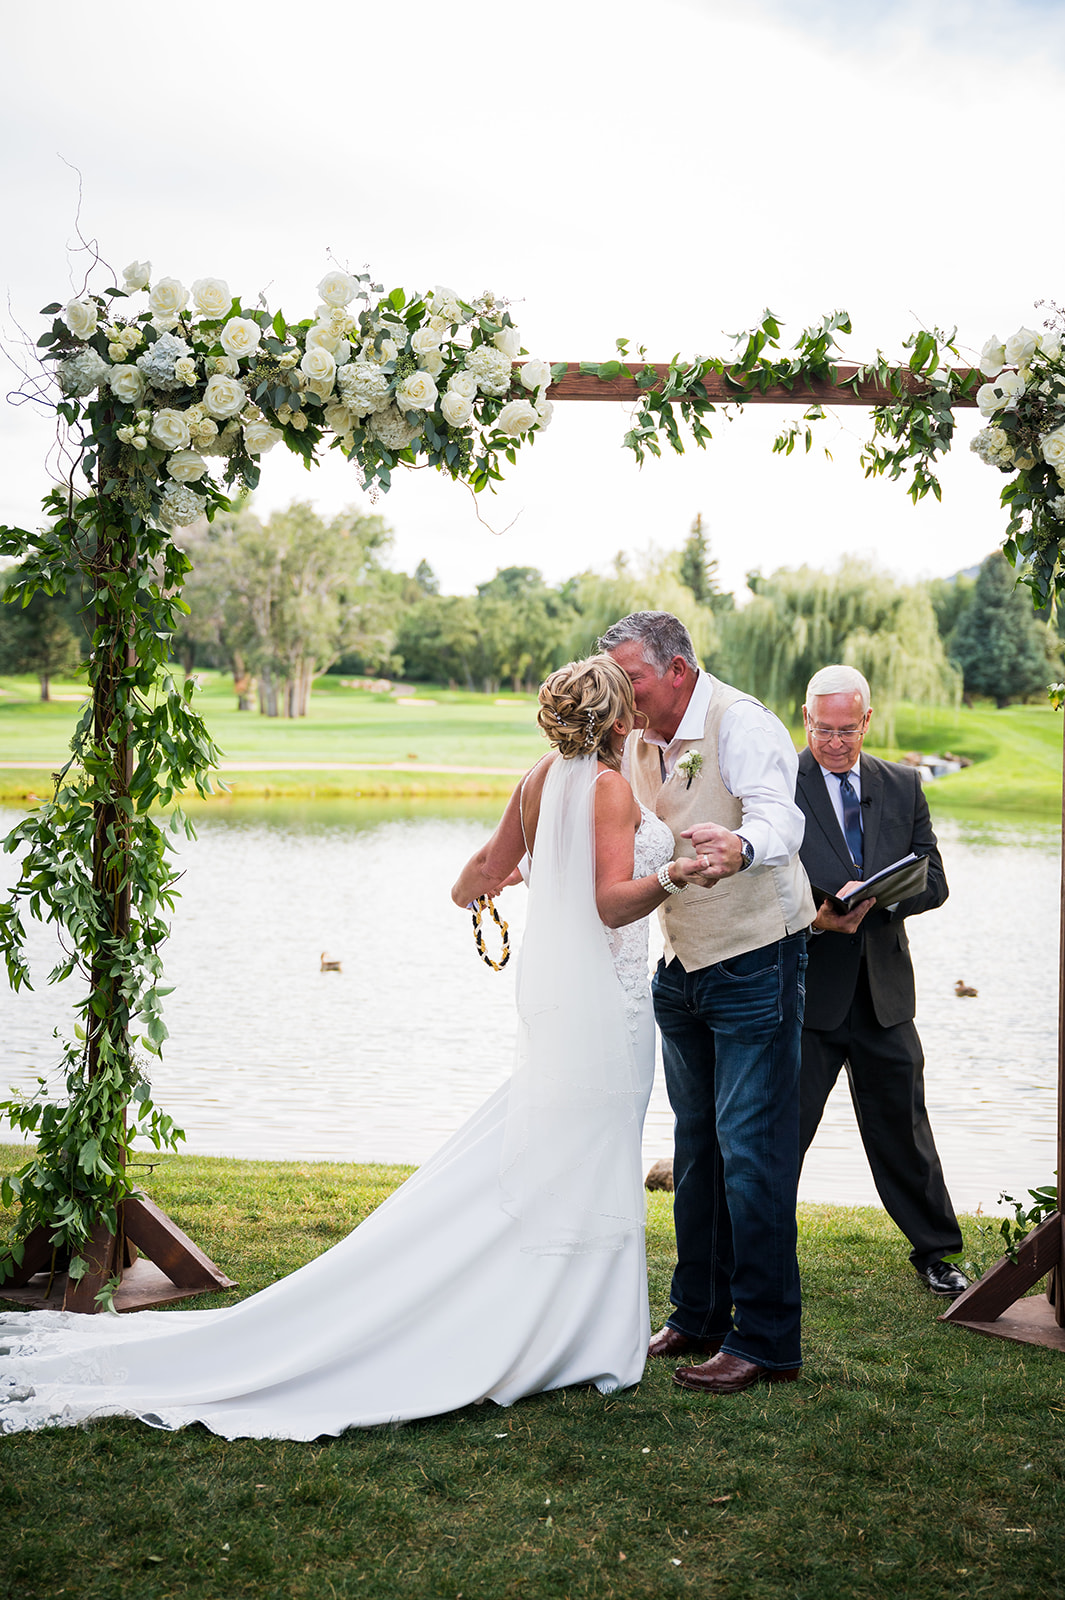 The bride and groom share their first kiss under the wedding arch.